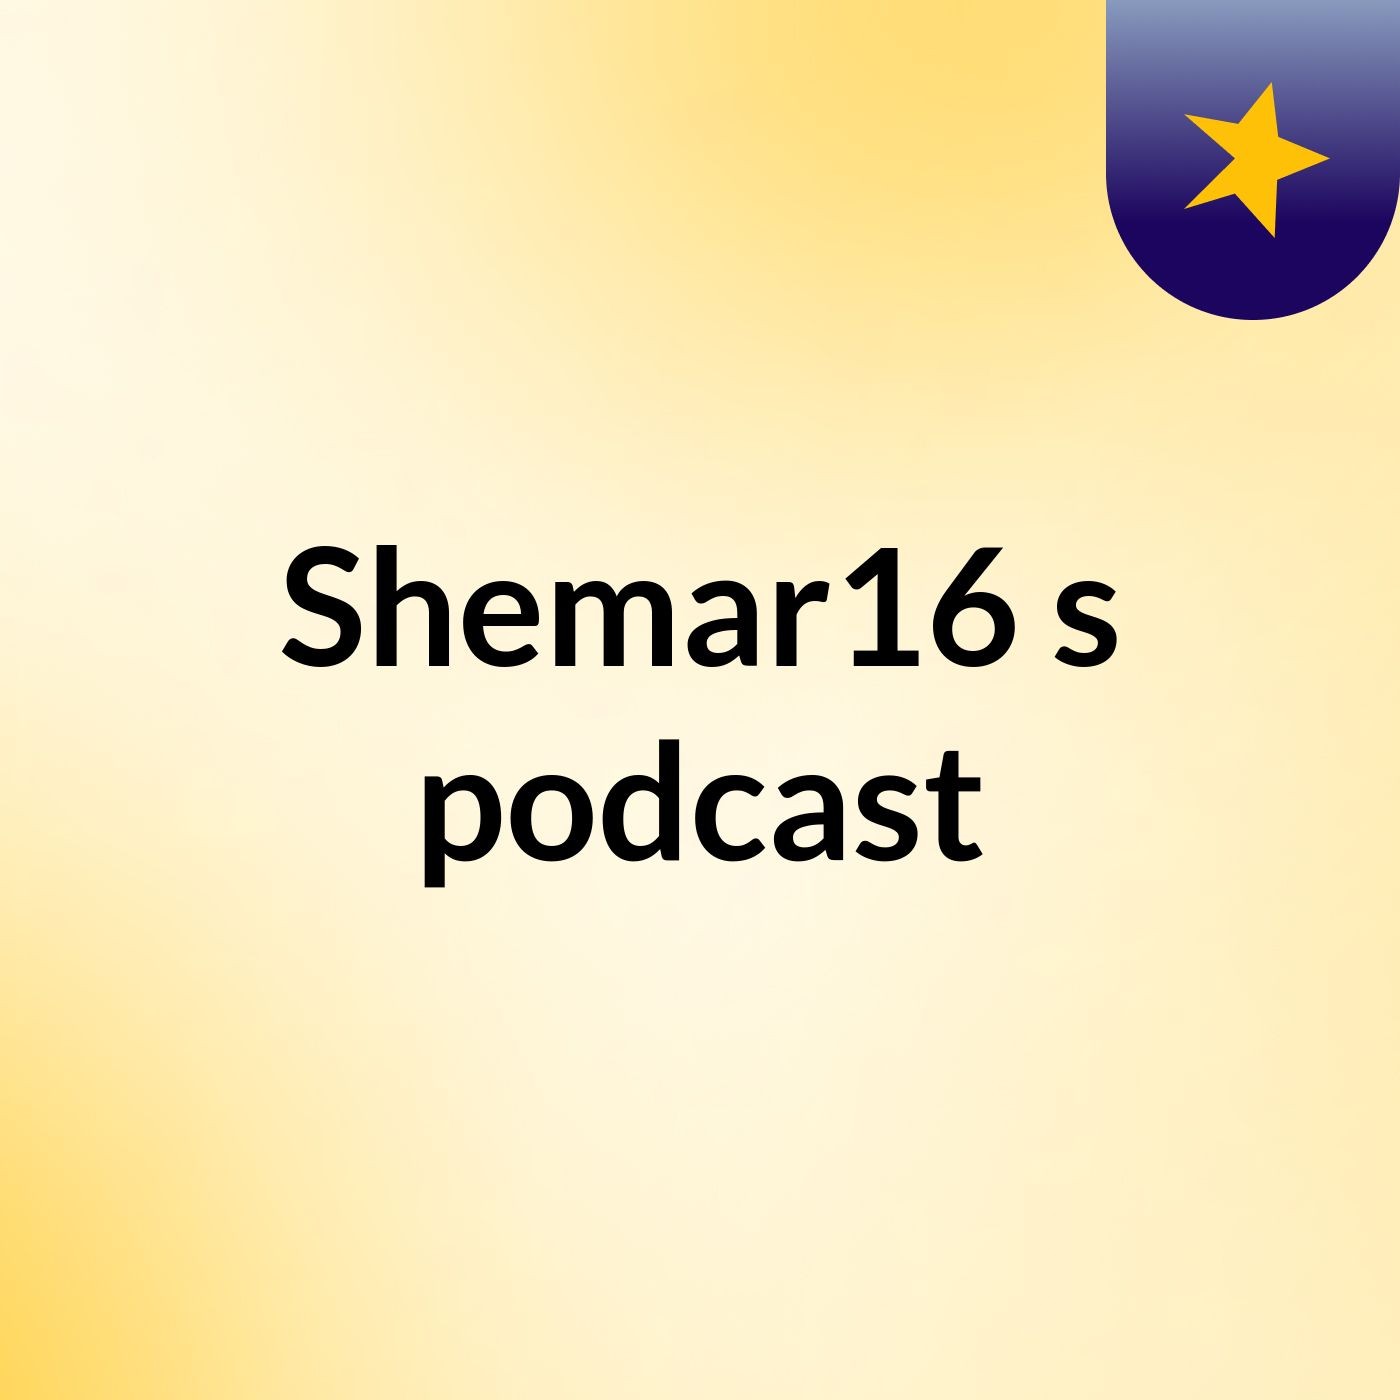 Episode 2 - Shemar16's podcast